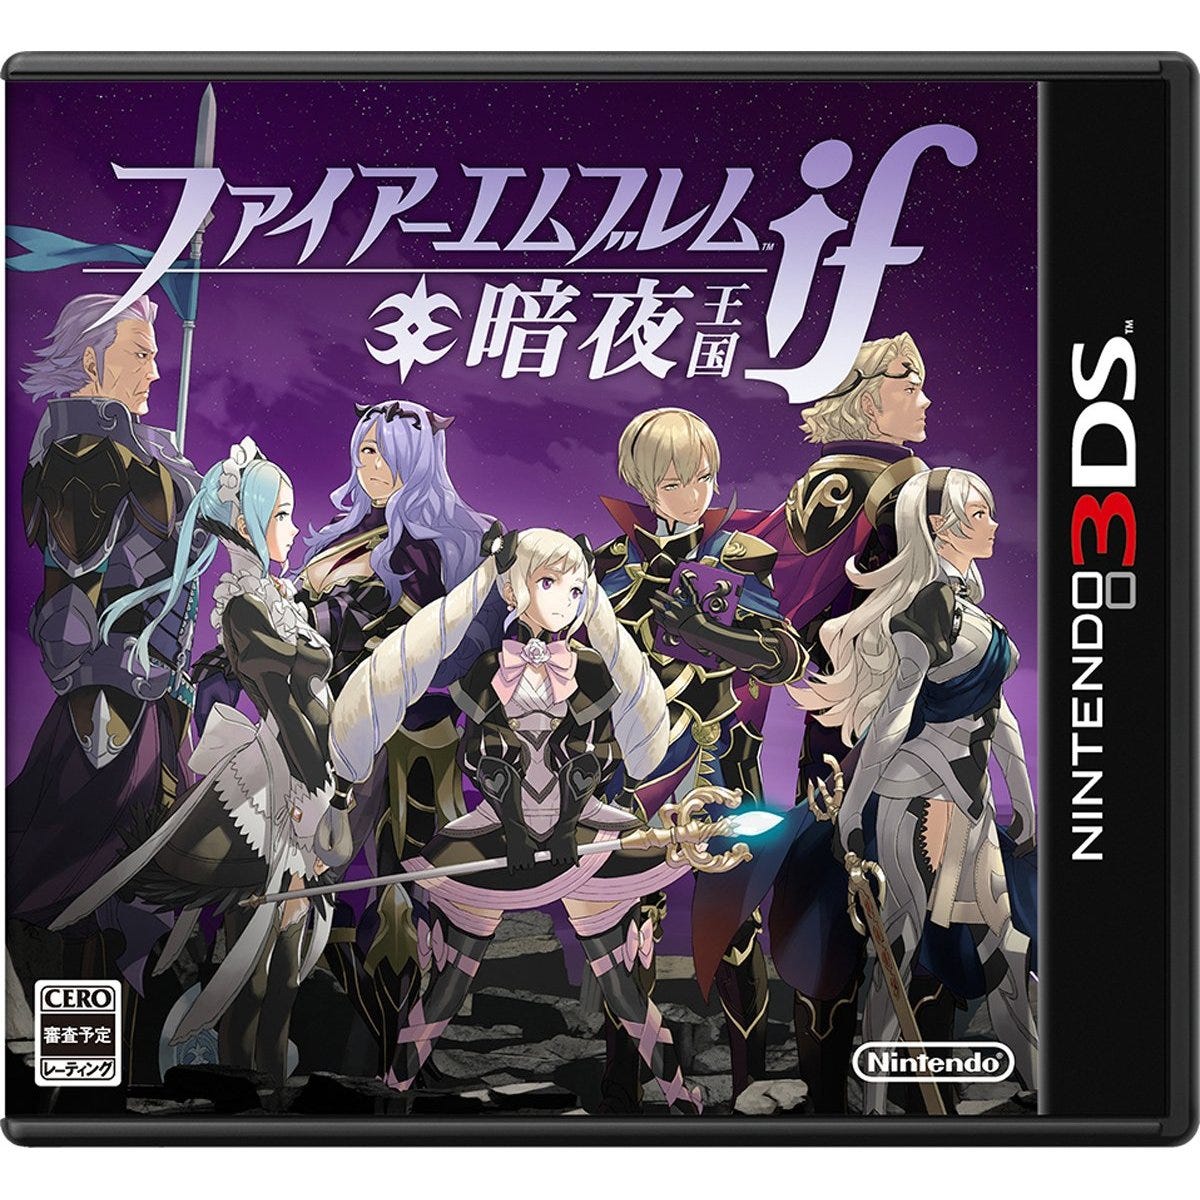 Fire Emblem Fates Is The First Nintendo Game To Allow Same Sex Marriage 3634